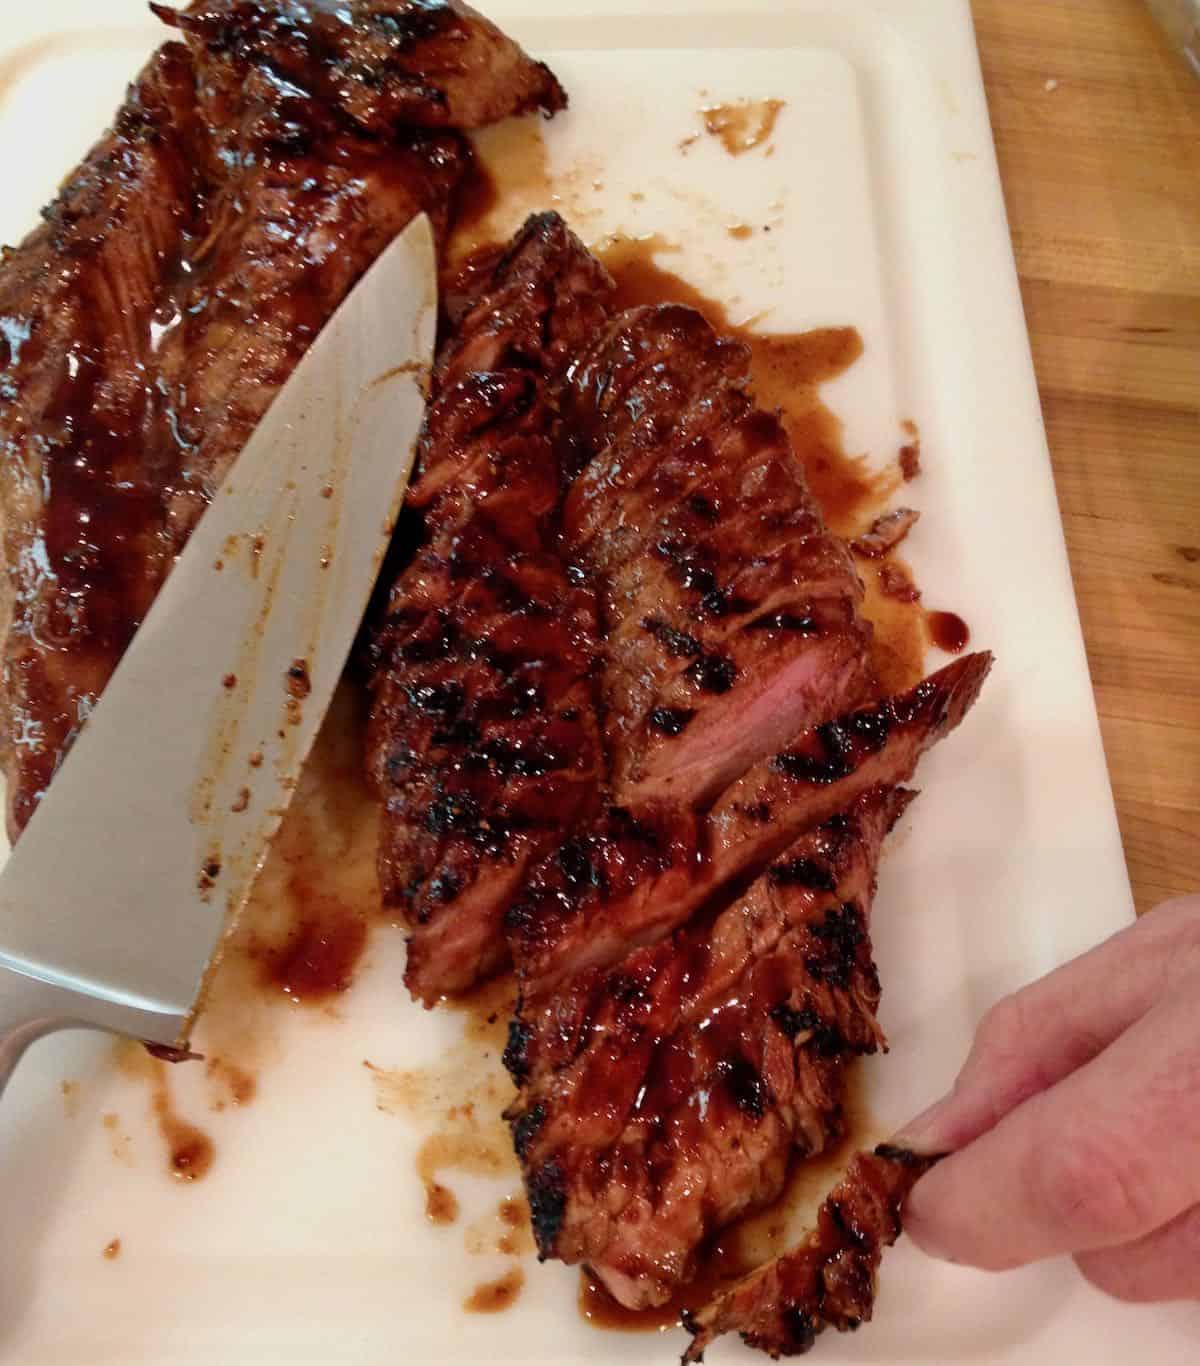 Grilled Steak perfection following these great grilling tips.